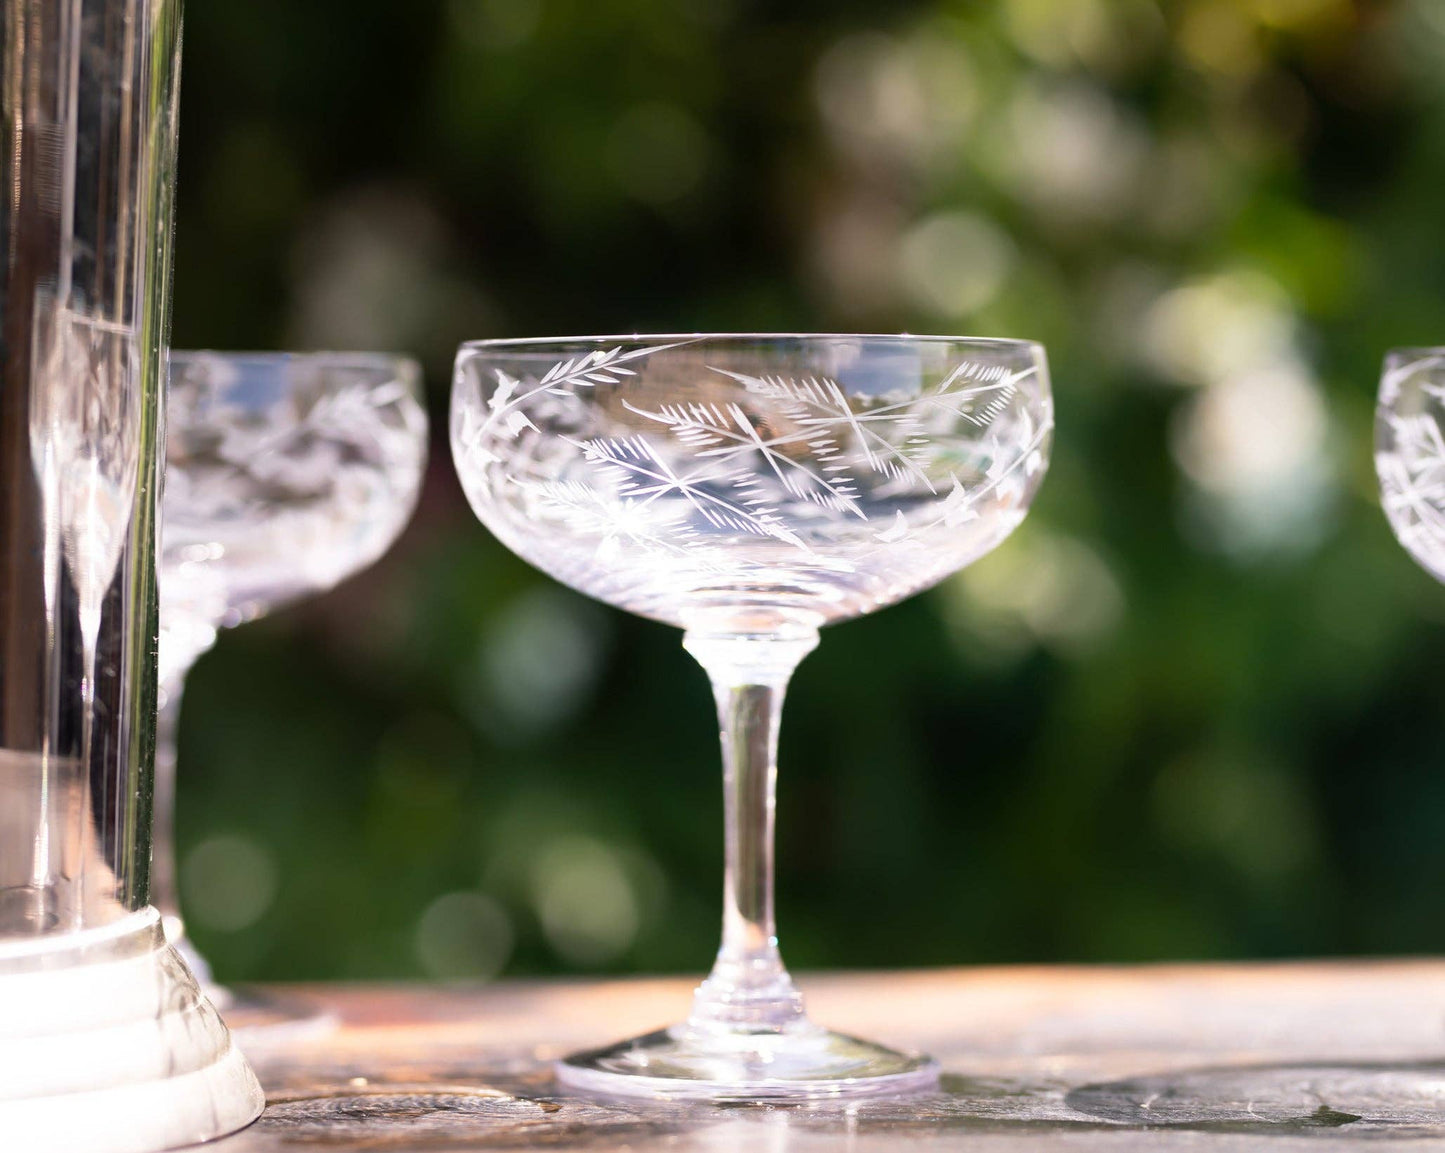 The Vintage List - A Set of Four Crystal Cocktail Glasses with Fern Design